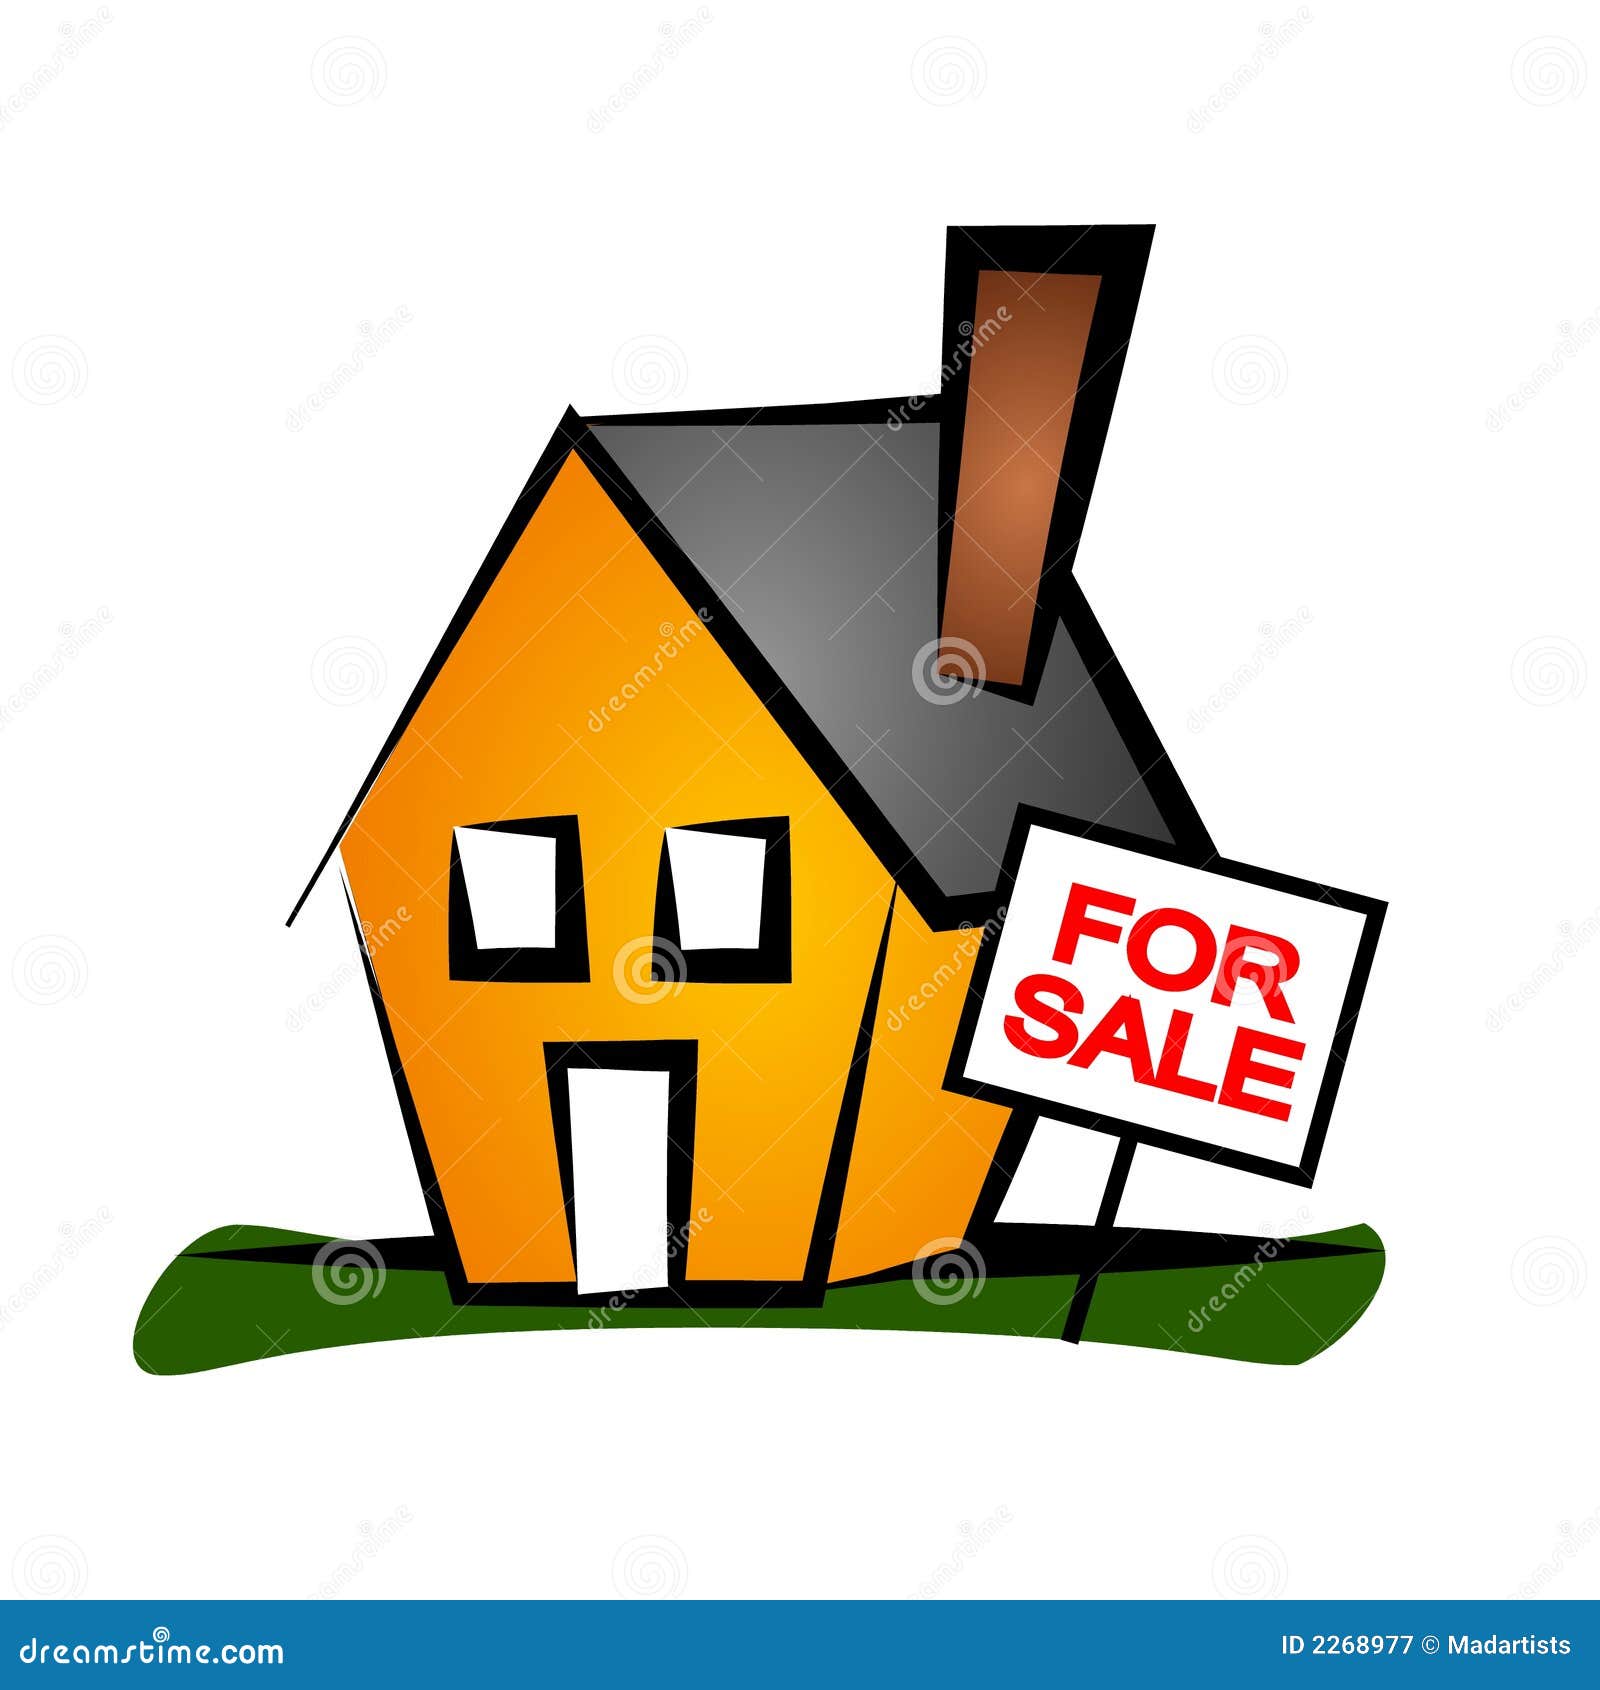 new house clipart - photo #41